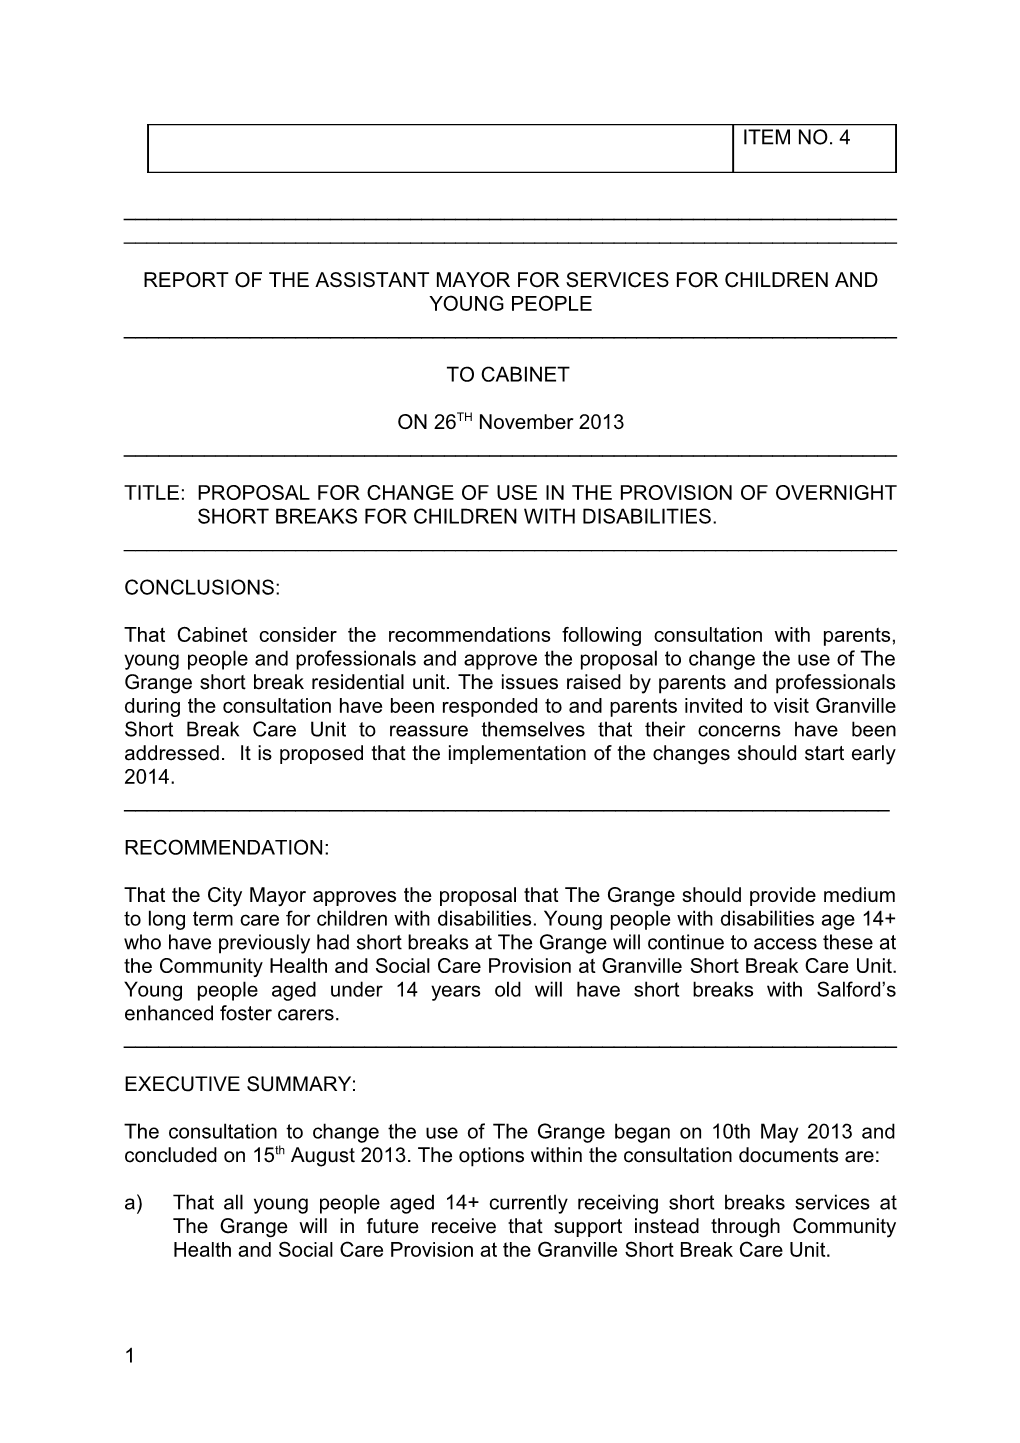 Report of the Assistant Mayor for Services for Children and Young People